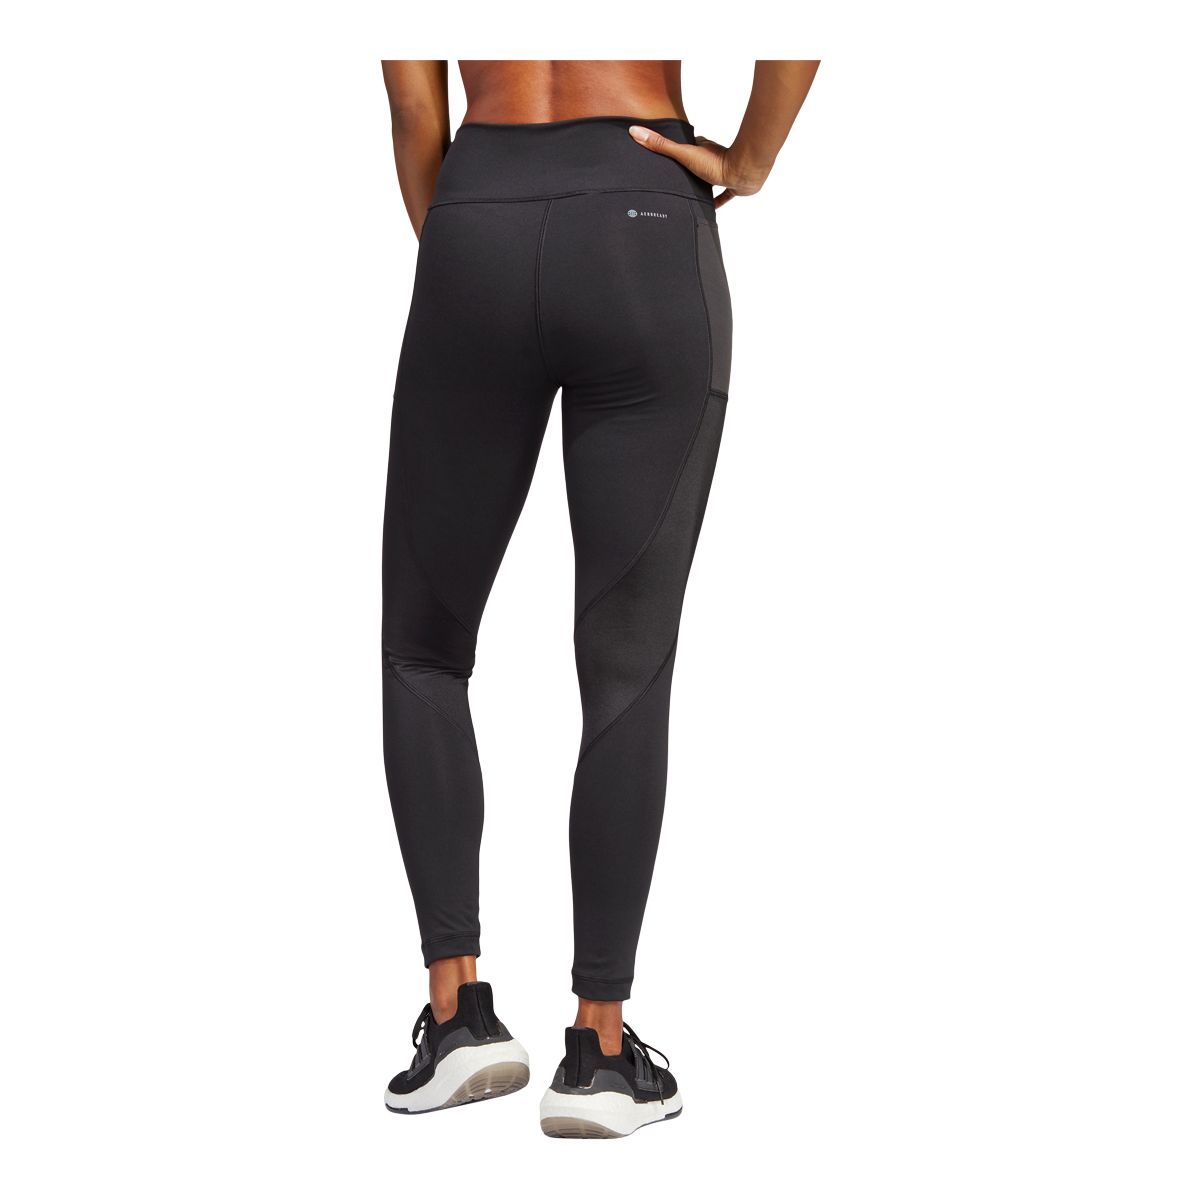 https://media-www.sportchek.ca/product/div-03-softgoods/dpt-70-athletic-clothing/sdpt-02-womens/334007240/adidas-w-te-hiit-7-8-23in-tight-52c32bca-ba5e-4285-bab4-0537d19f92cf-jpgrendition.jpg?imdensity=1&imwidth=1244&impolicy=mZoom